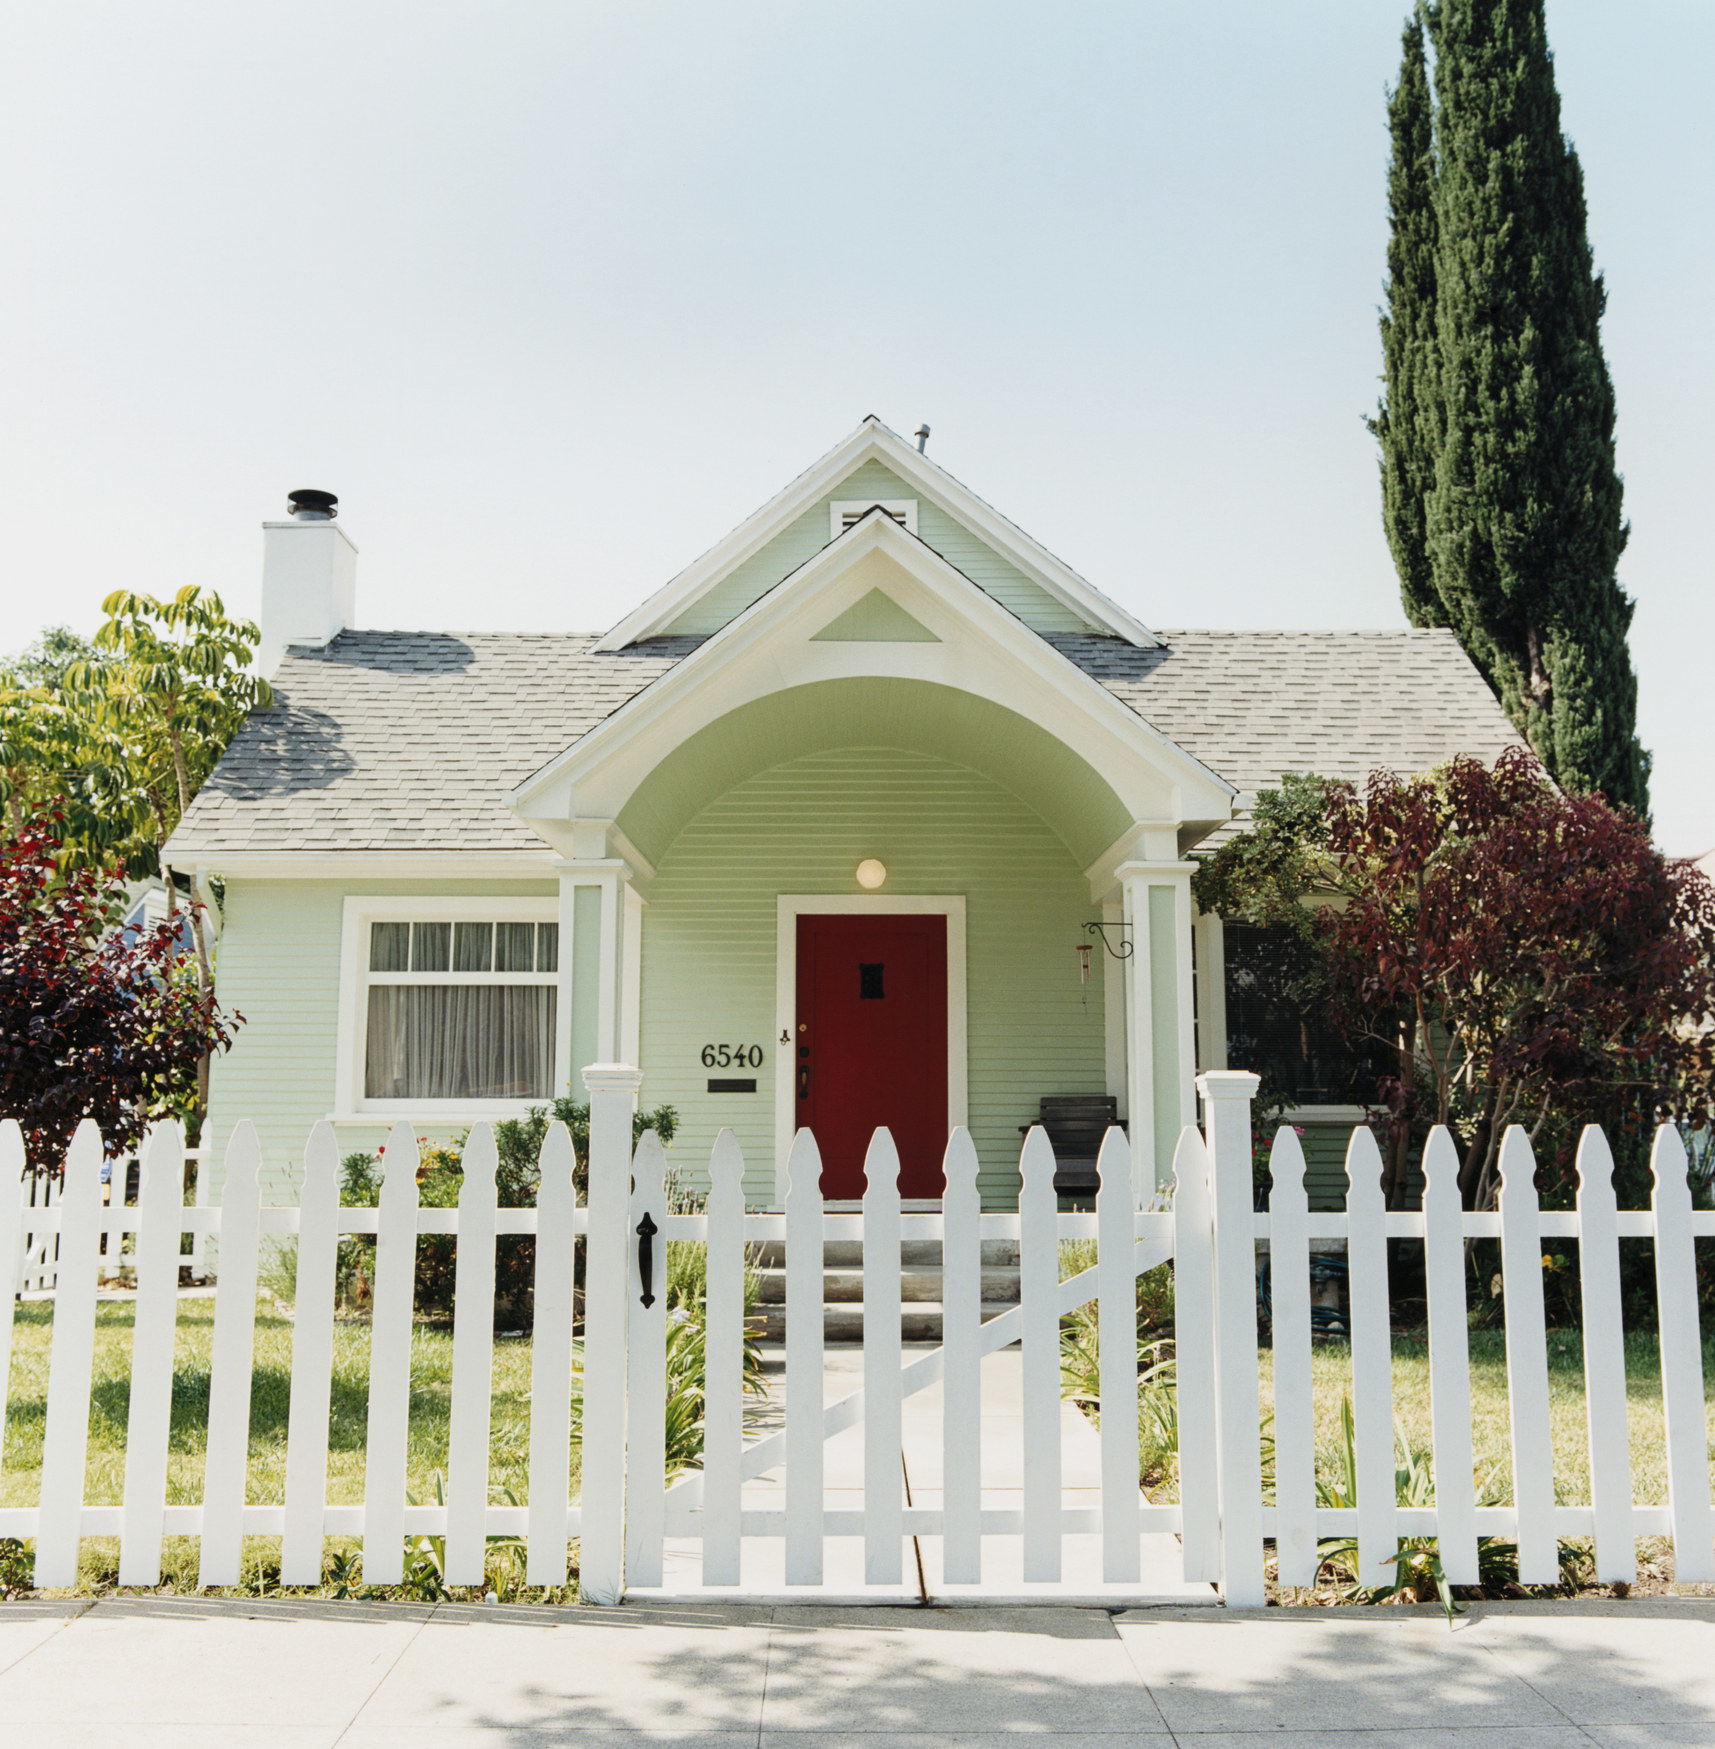 A house with a white picket fence.